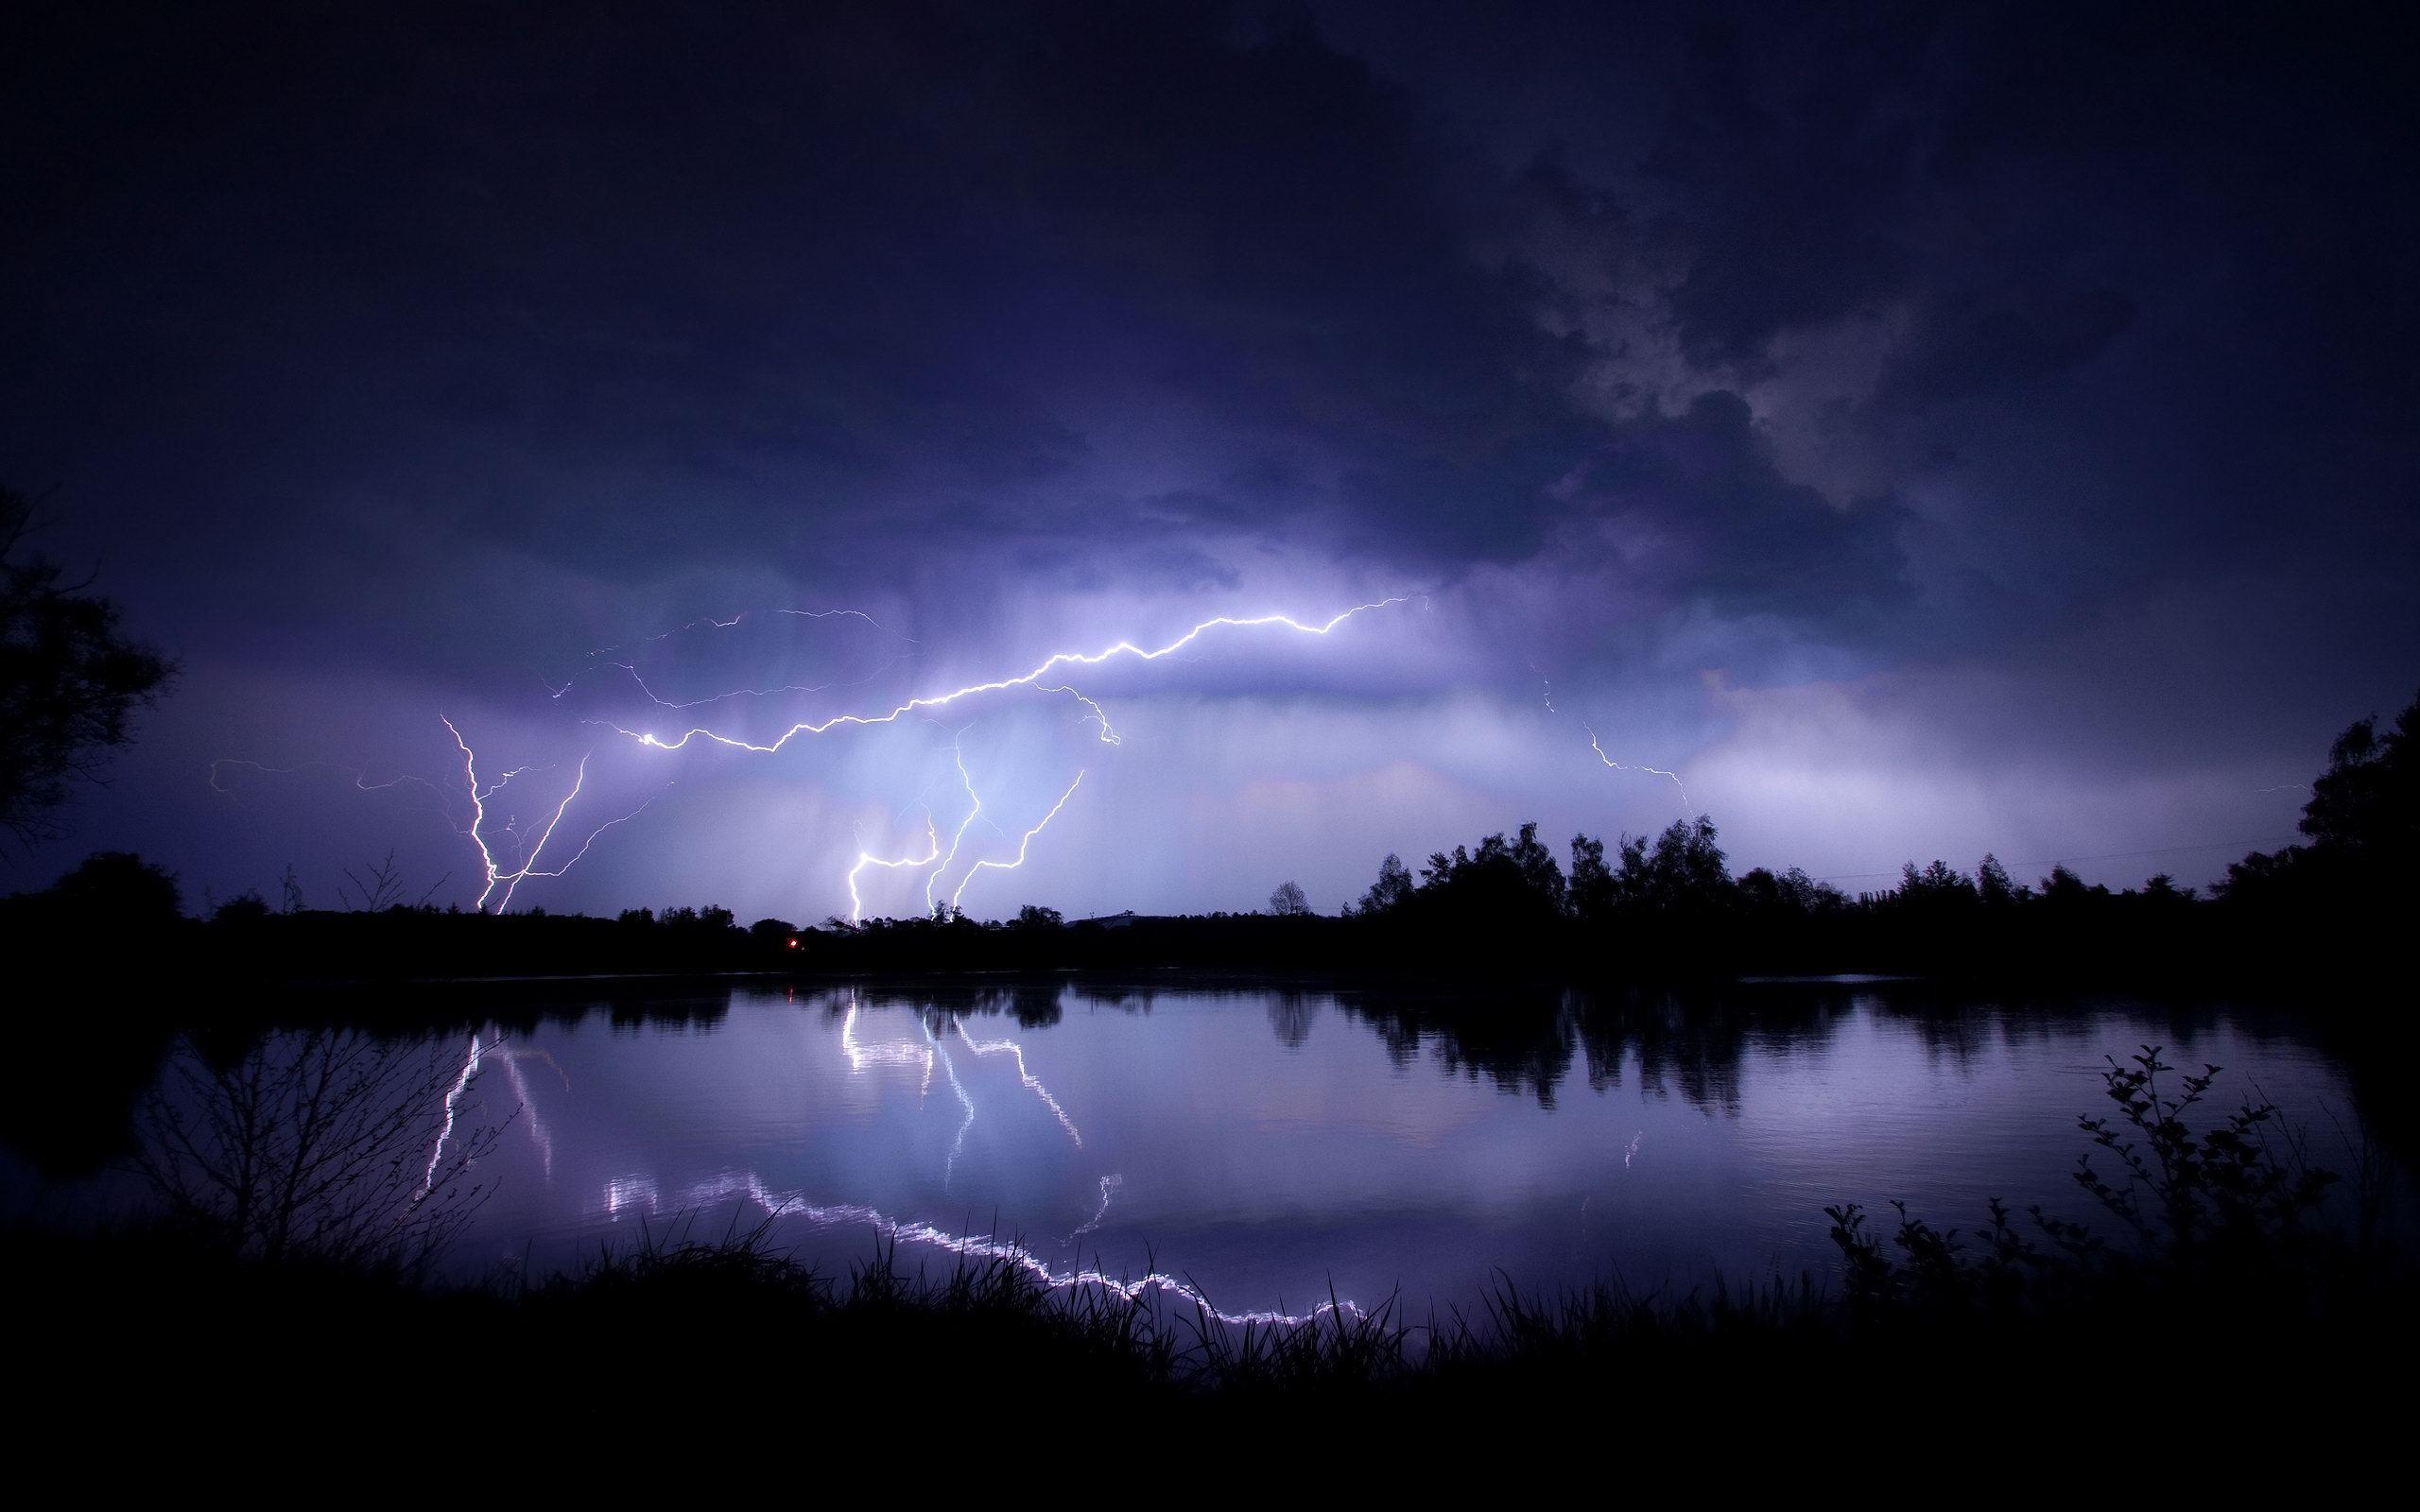 Lightning Storm over a Lake at night